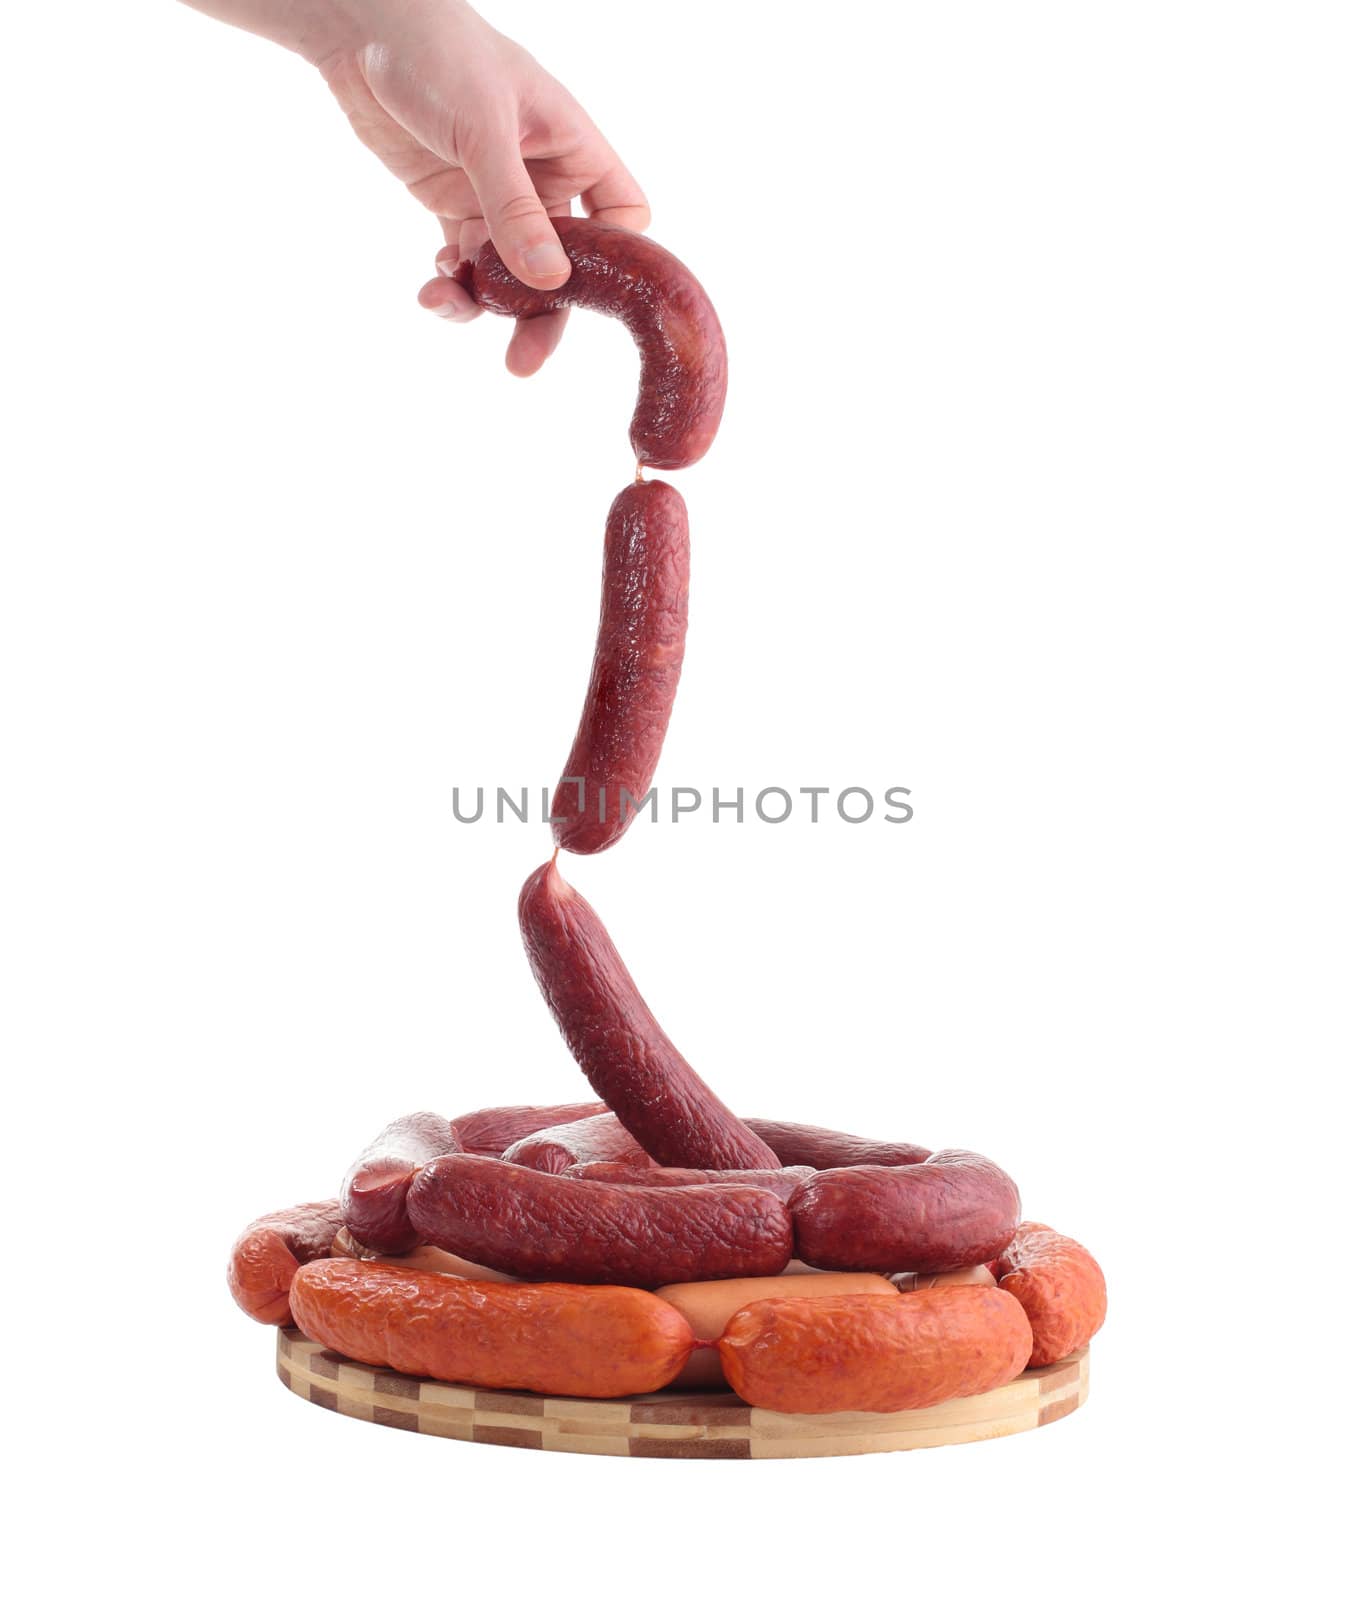 holding various sausages isolated on white background